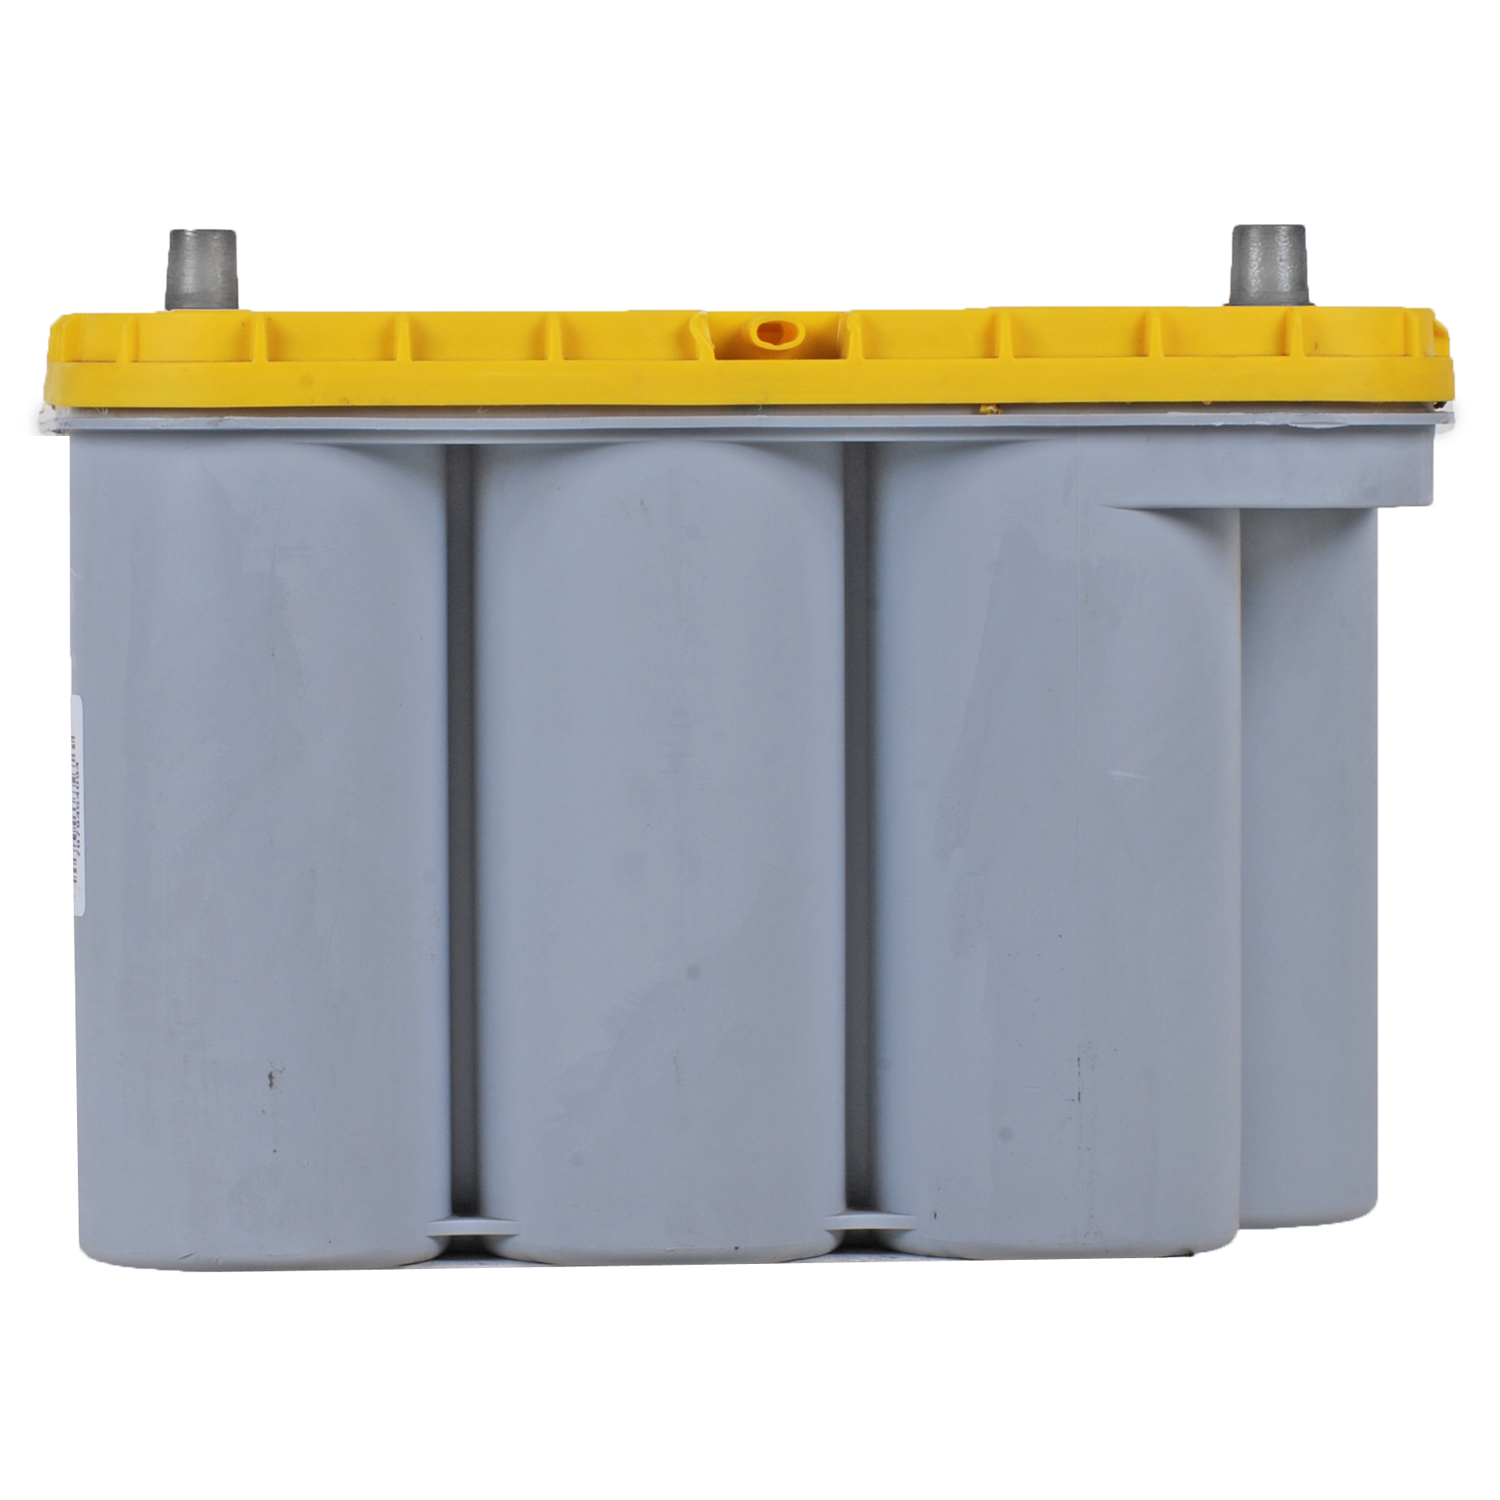 OPTIMA YellowTop AGM Spiralcell Dual Purpose Battery, Group Size D31T, 12 Volt 900 CCA - image 2 of 5